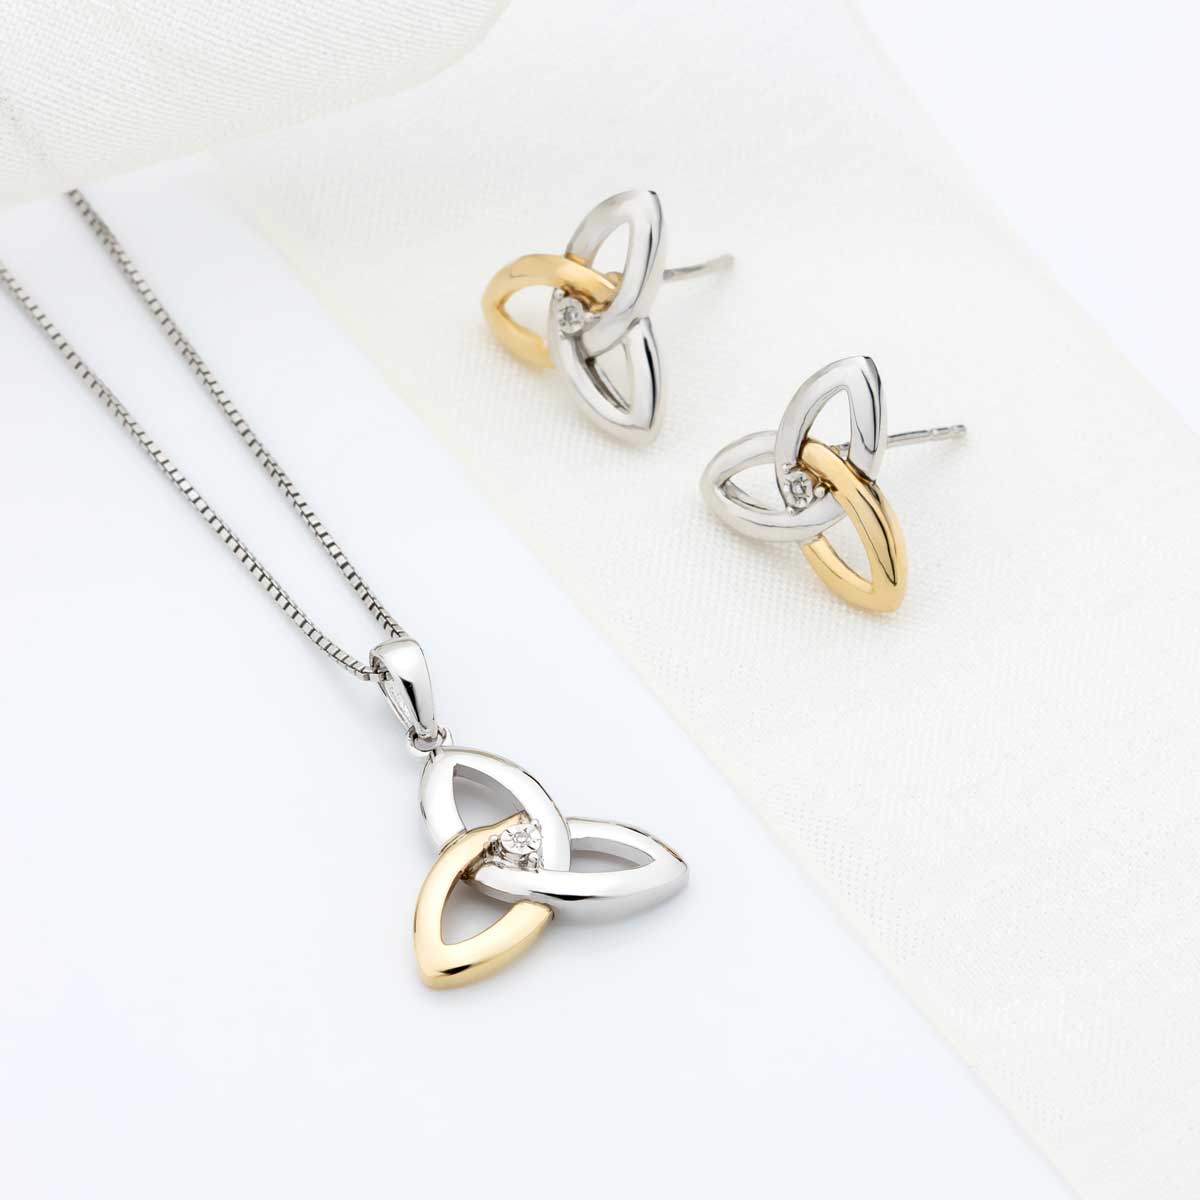 Product image for Irish Necklace | Diamond Sterling Silver and 10k Yellow Gold Celtic Trinity Knot Pendant